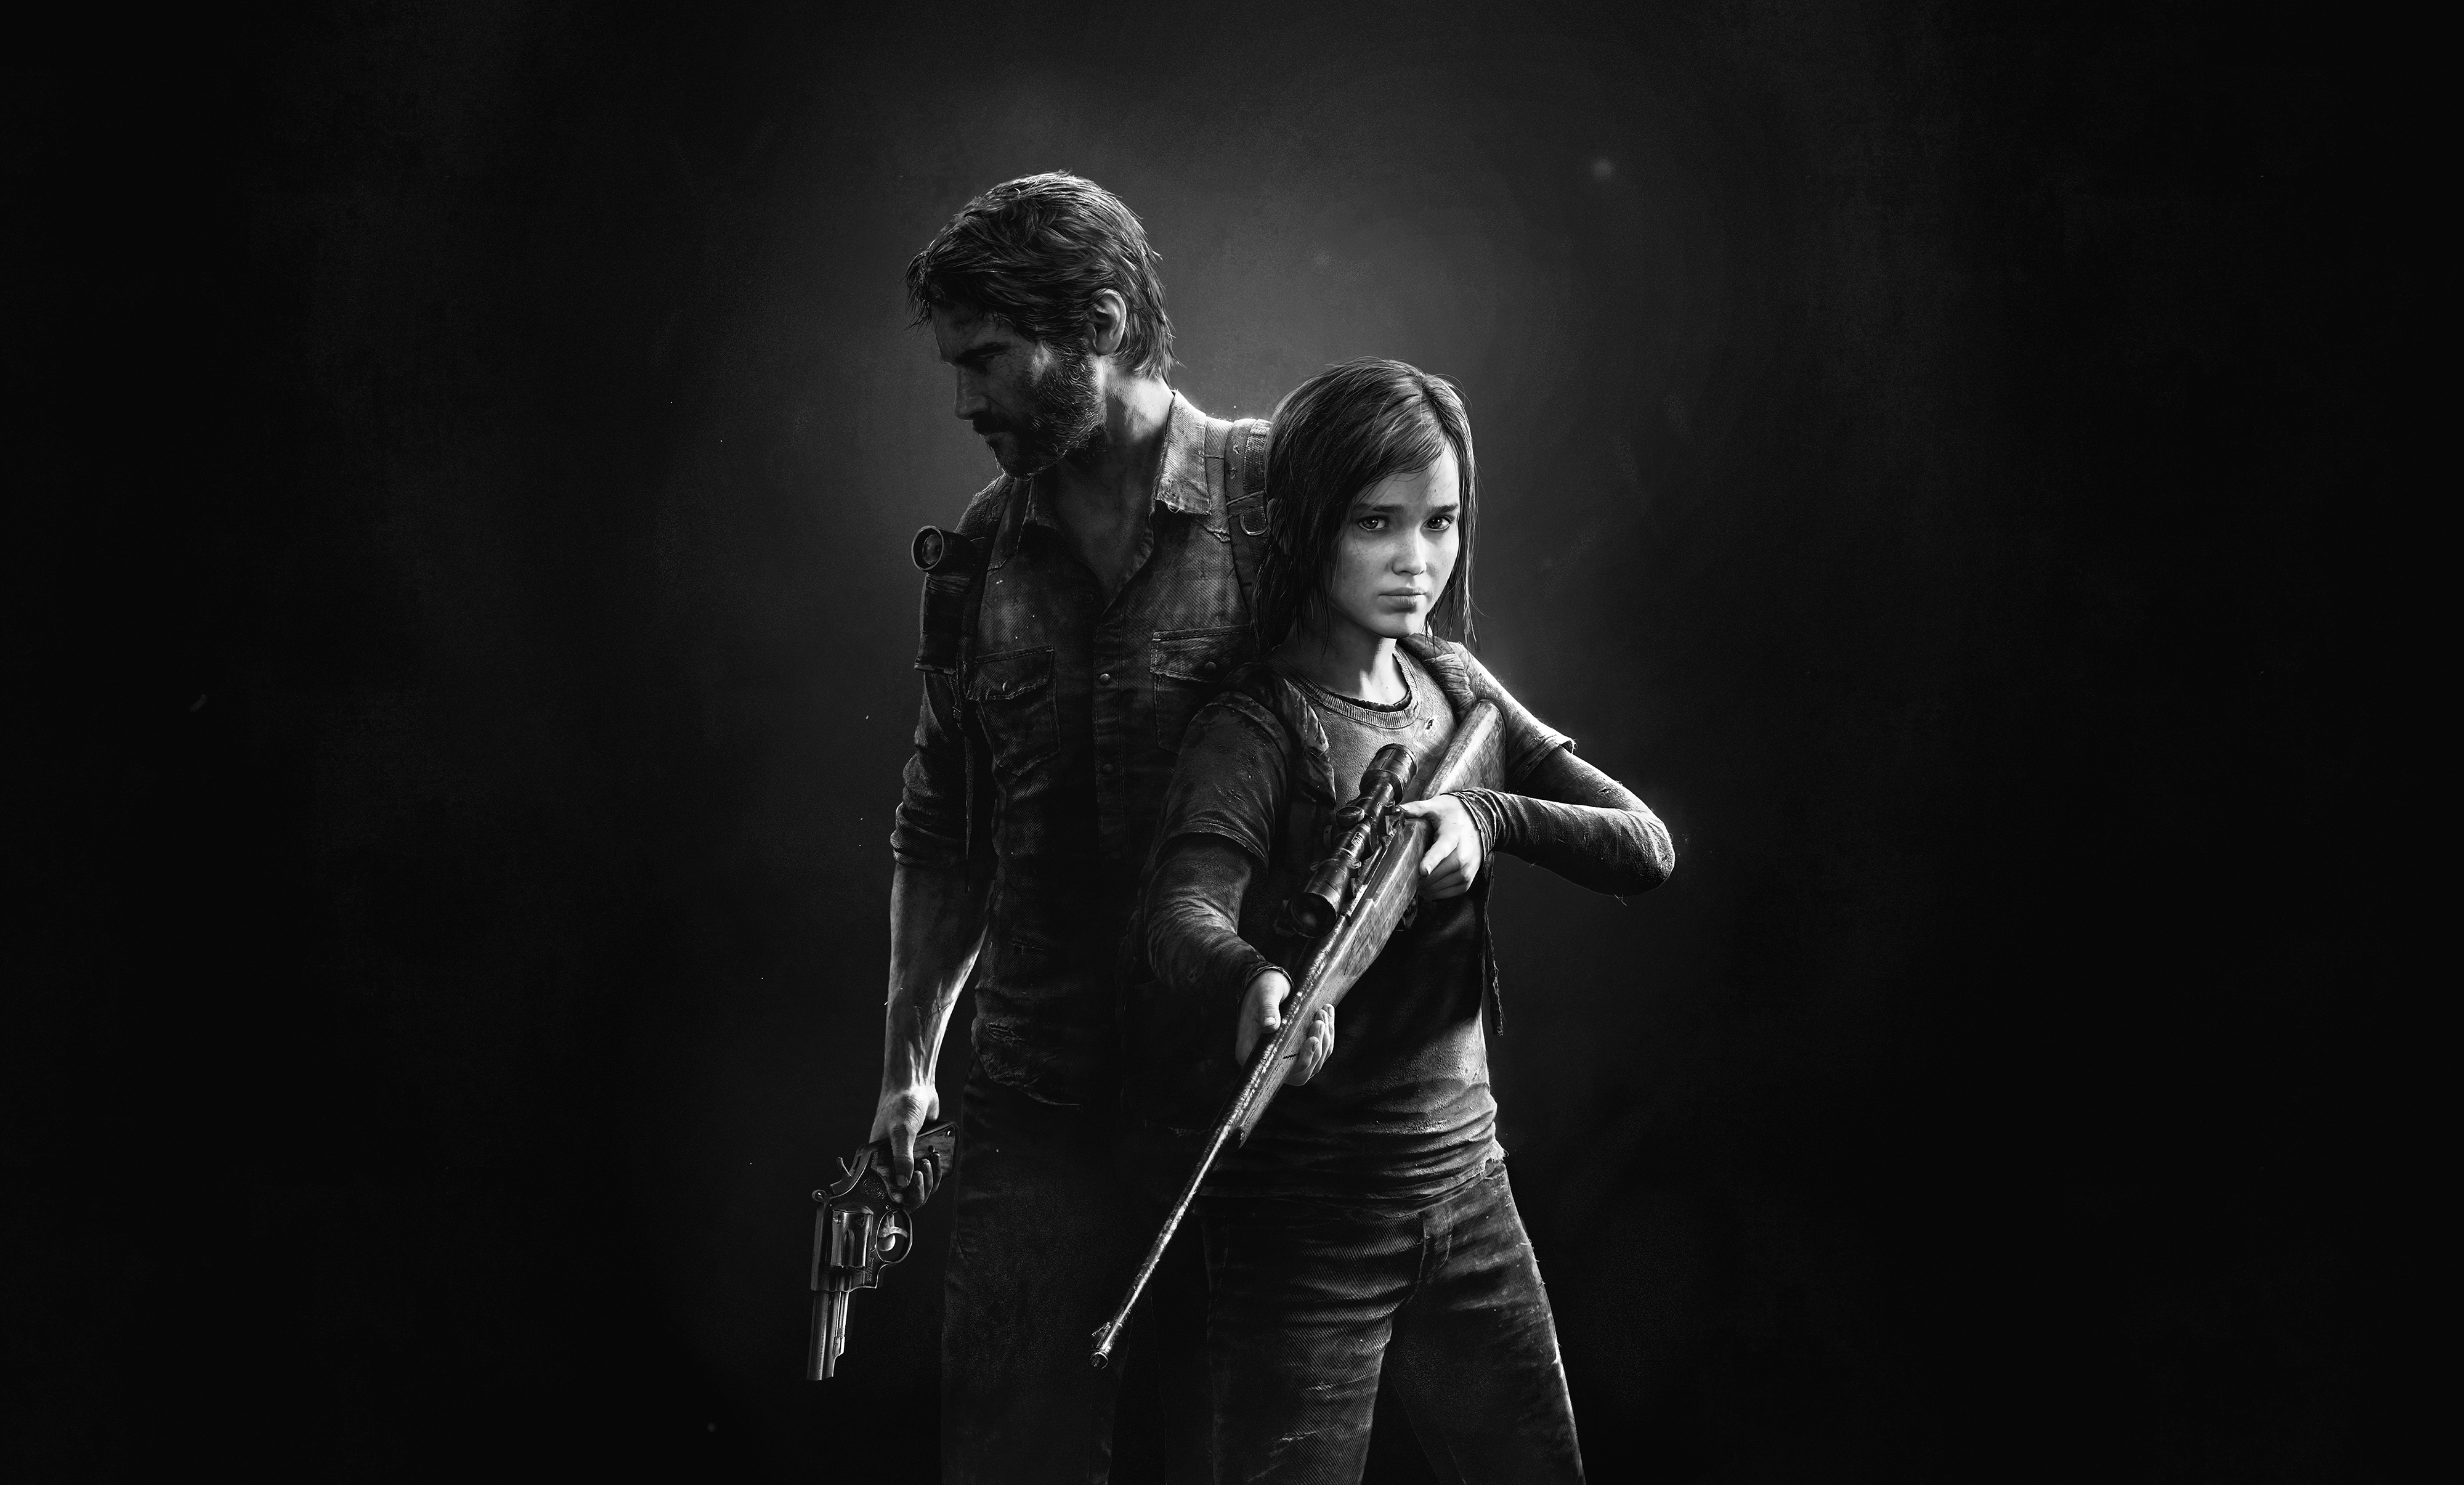 Votv posters. The last of us. Джоэл the last of us. Джоэл the last of us 1.